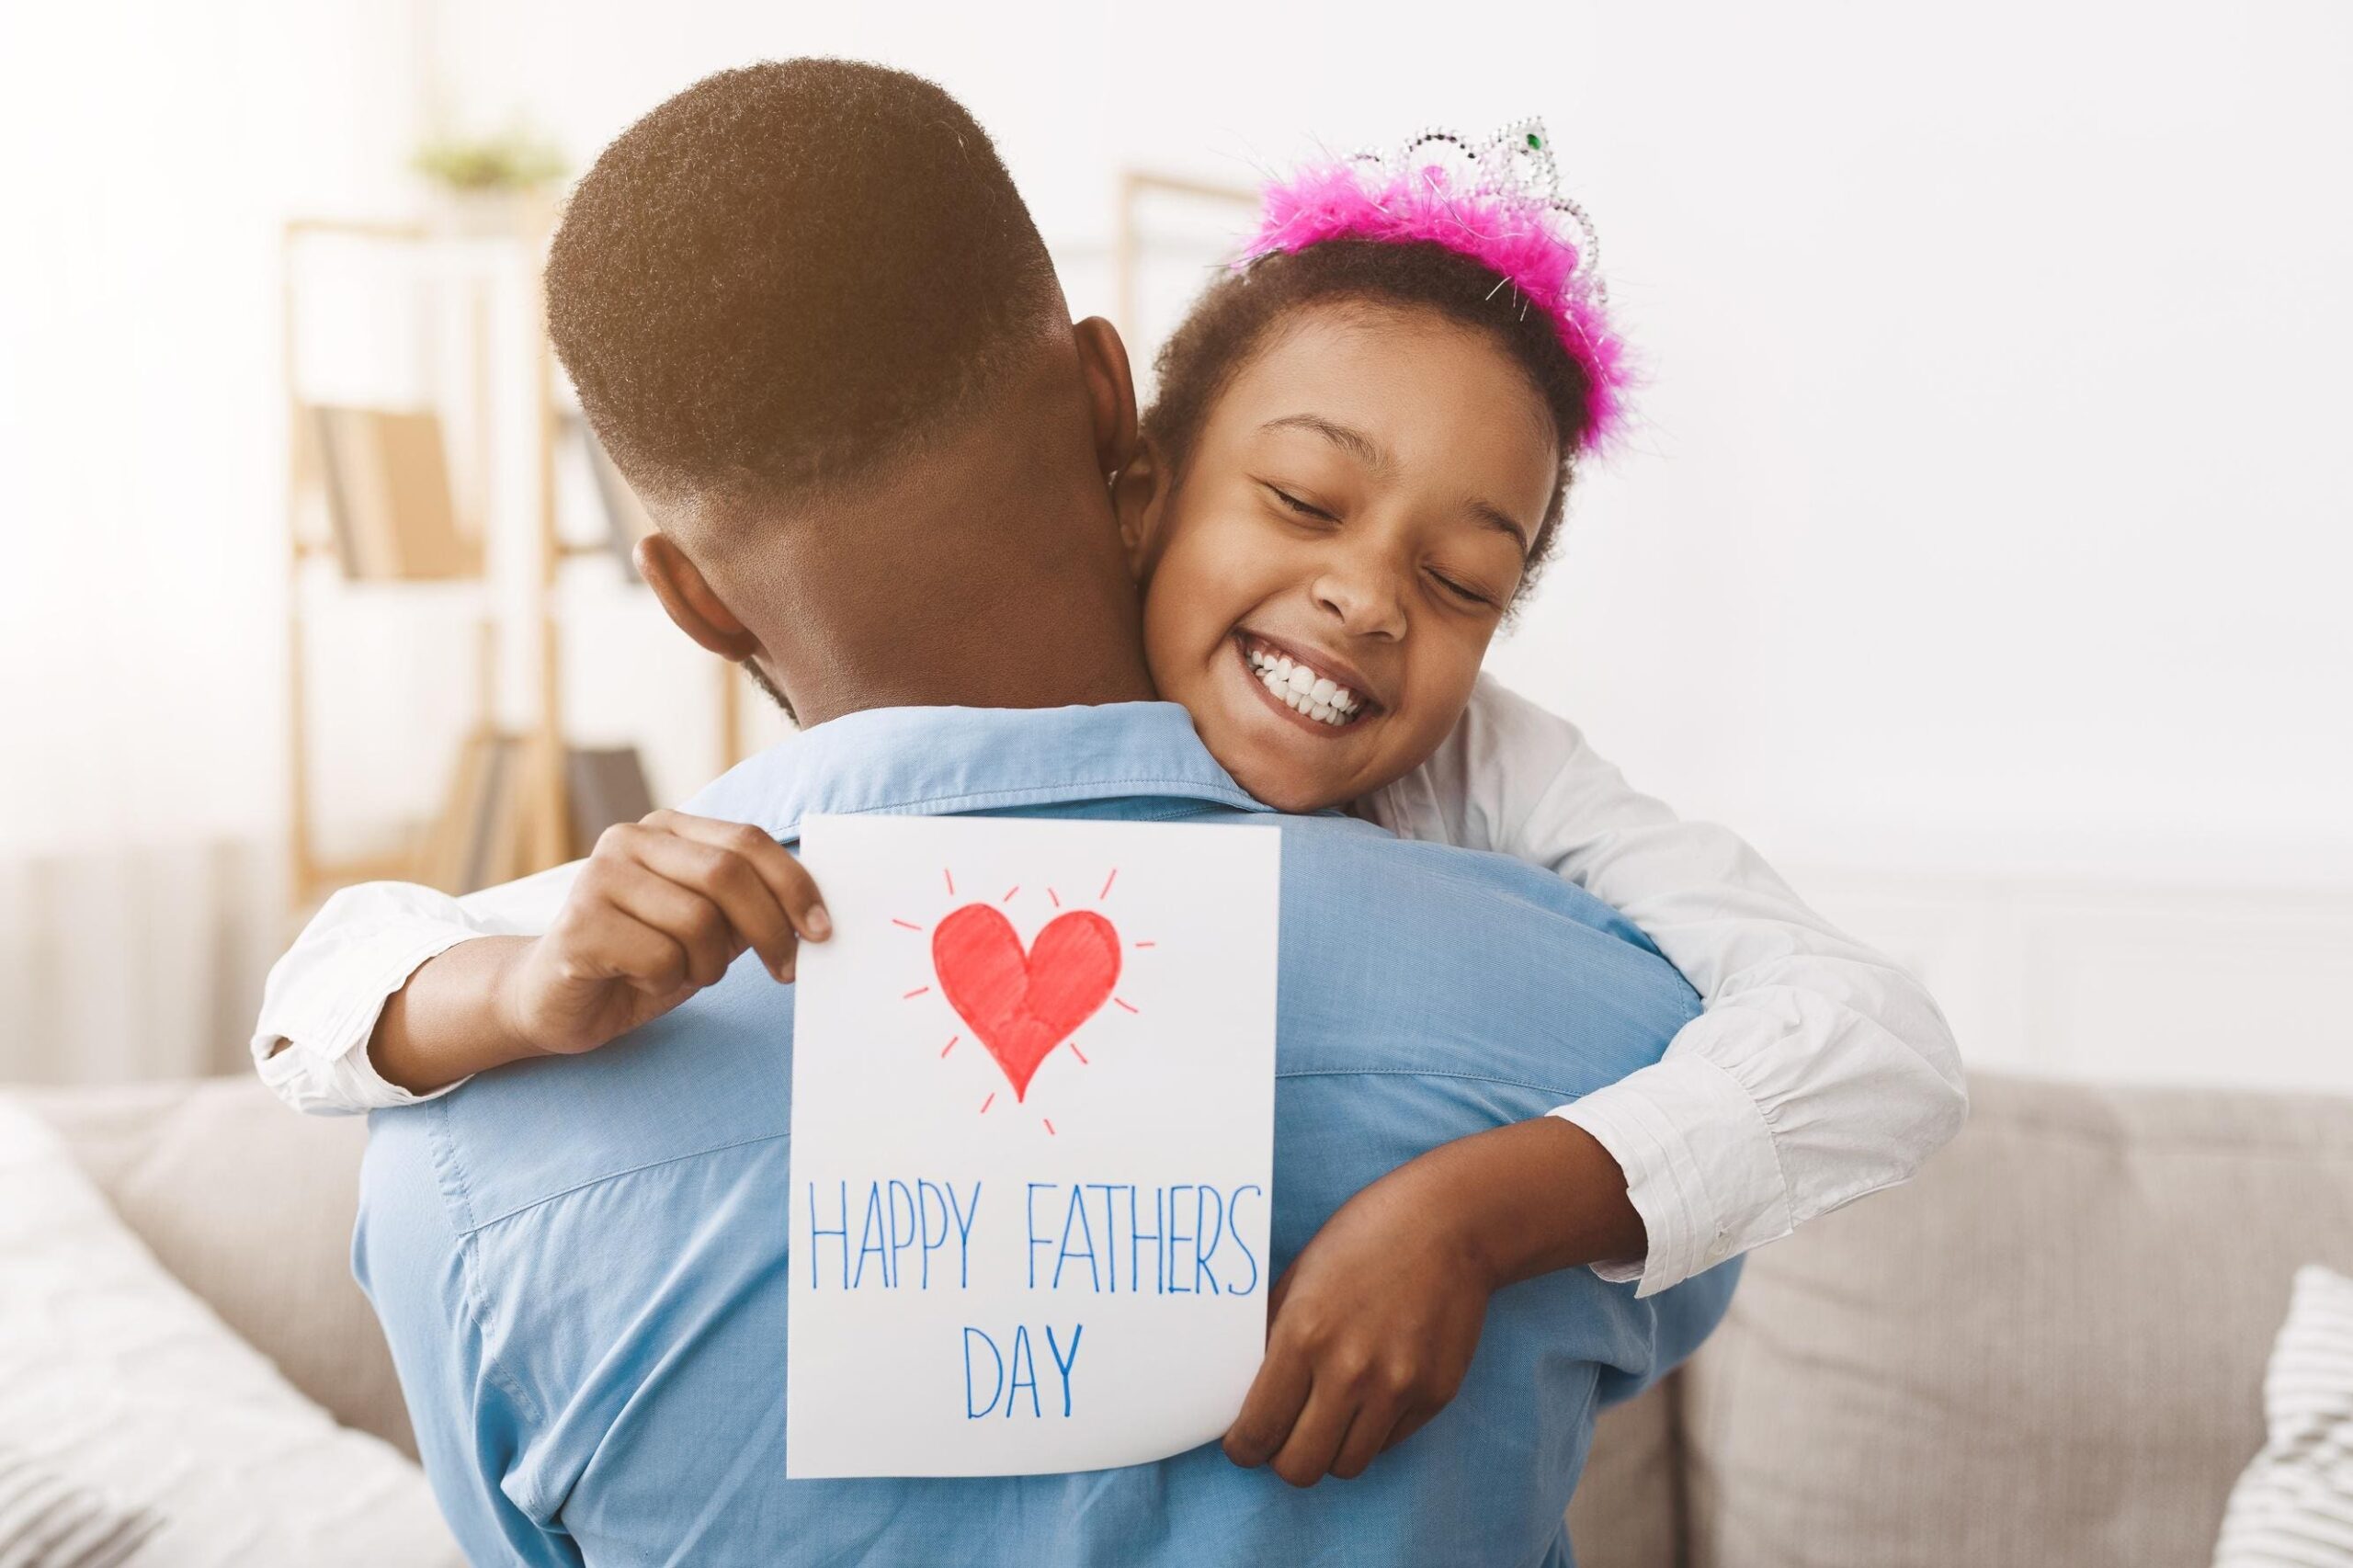 15 Healthy Home-Inspired Father’s Day Gift Ideas